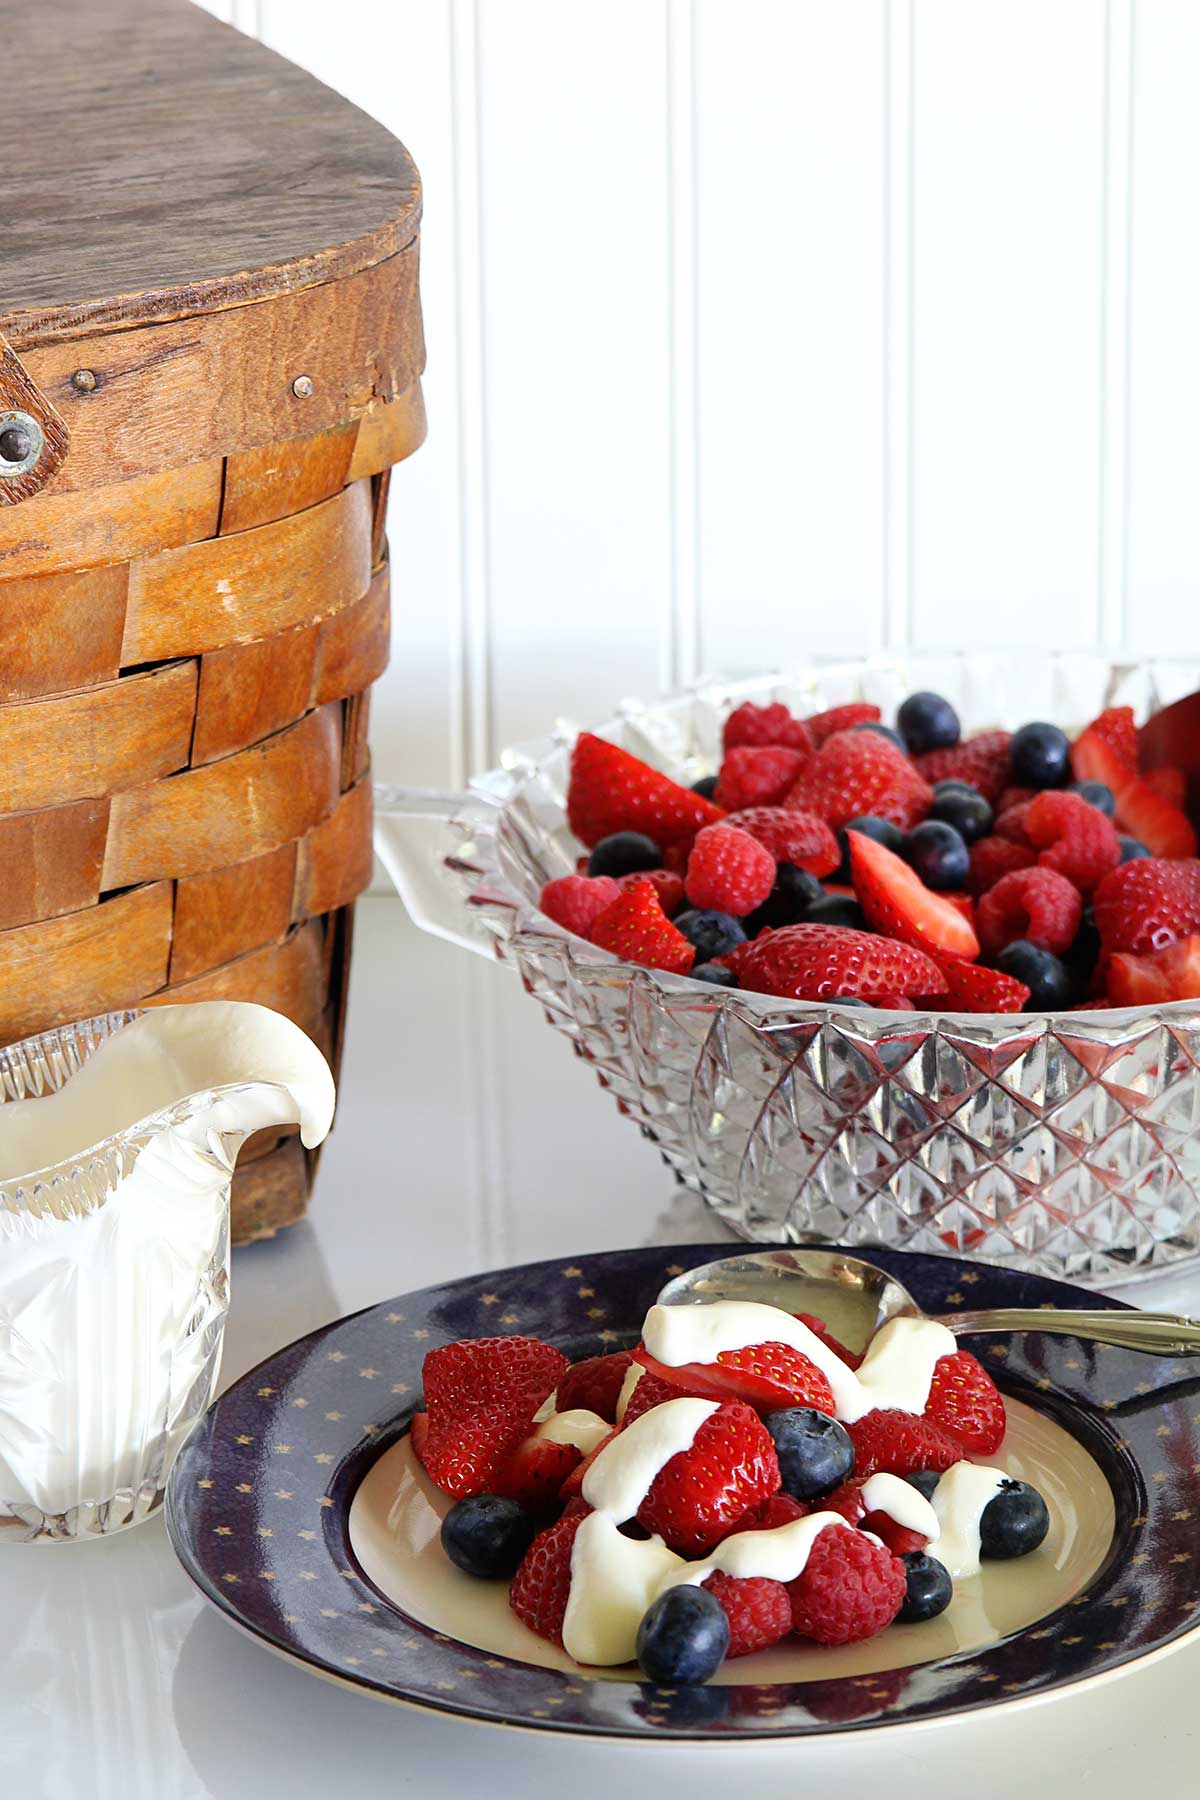 A summer fruit salad on a patriotic plate next to a wooden picnic basket.